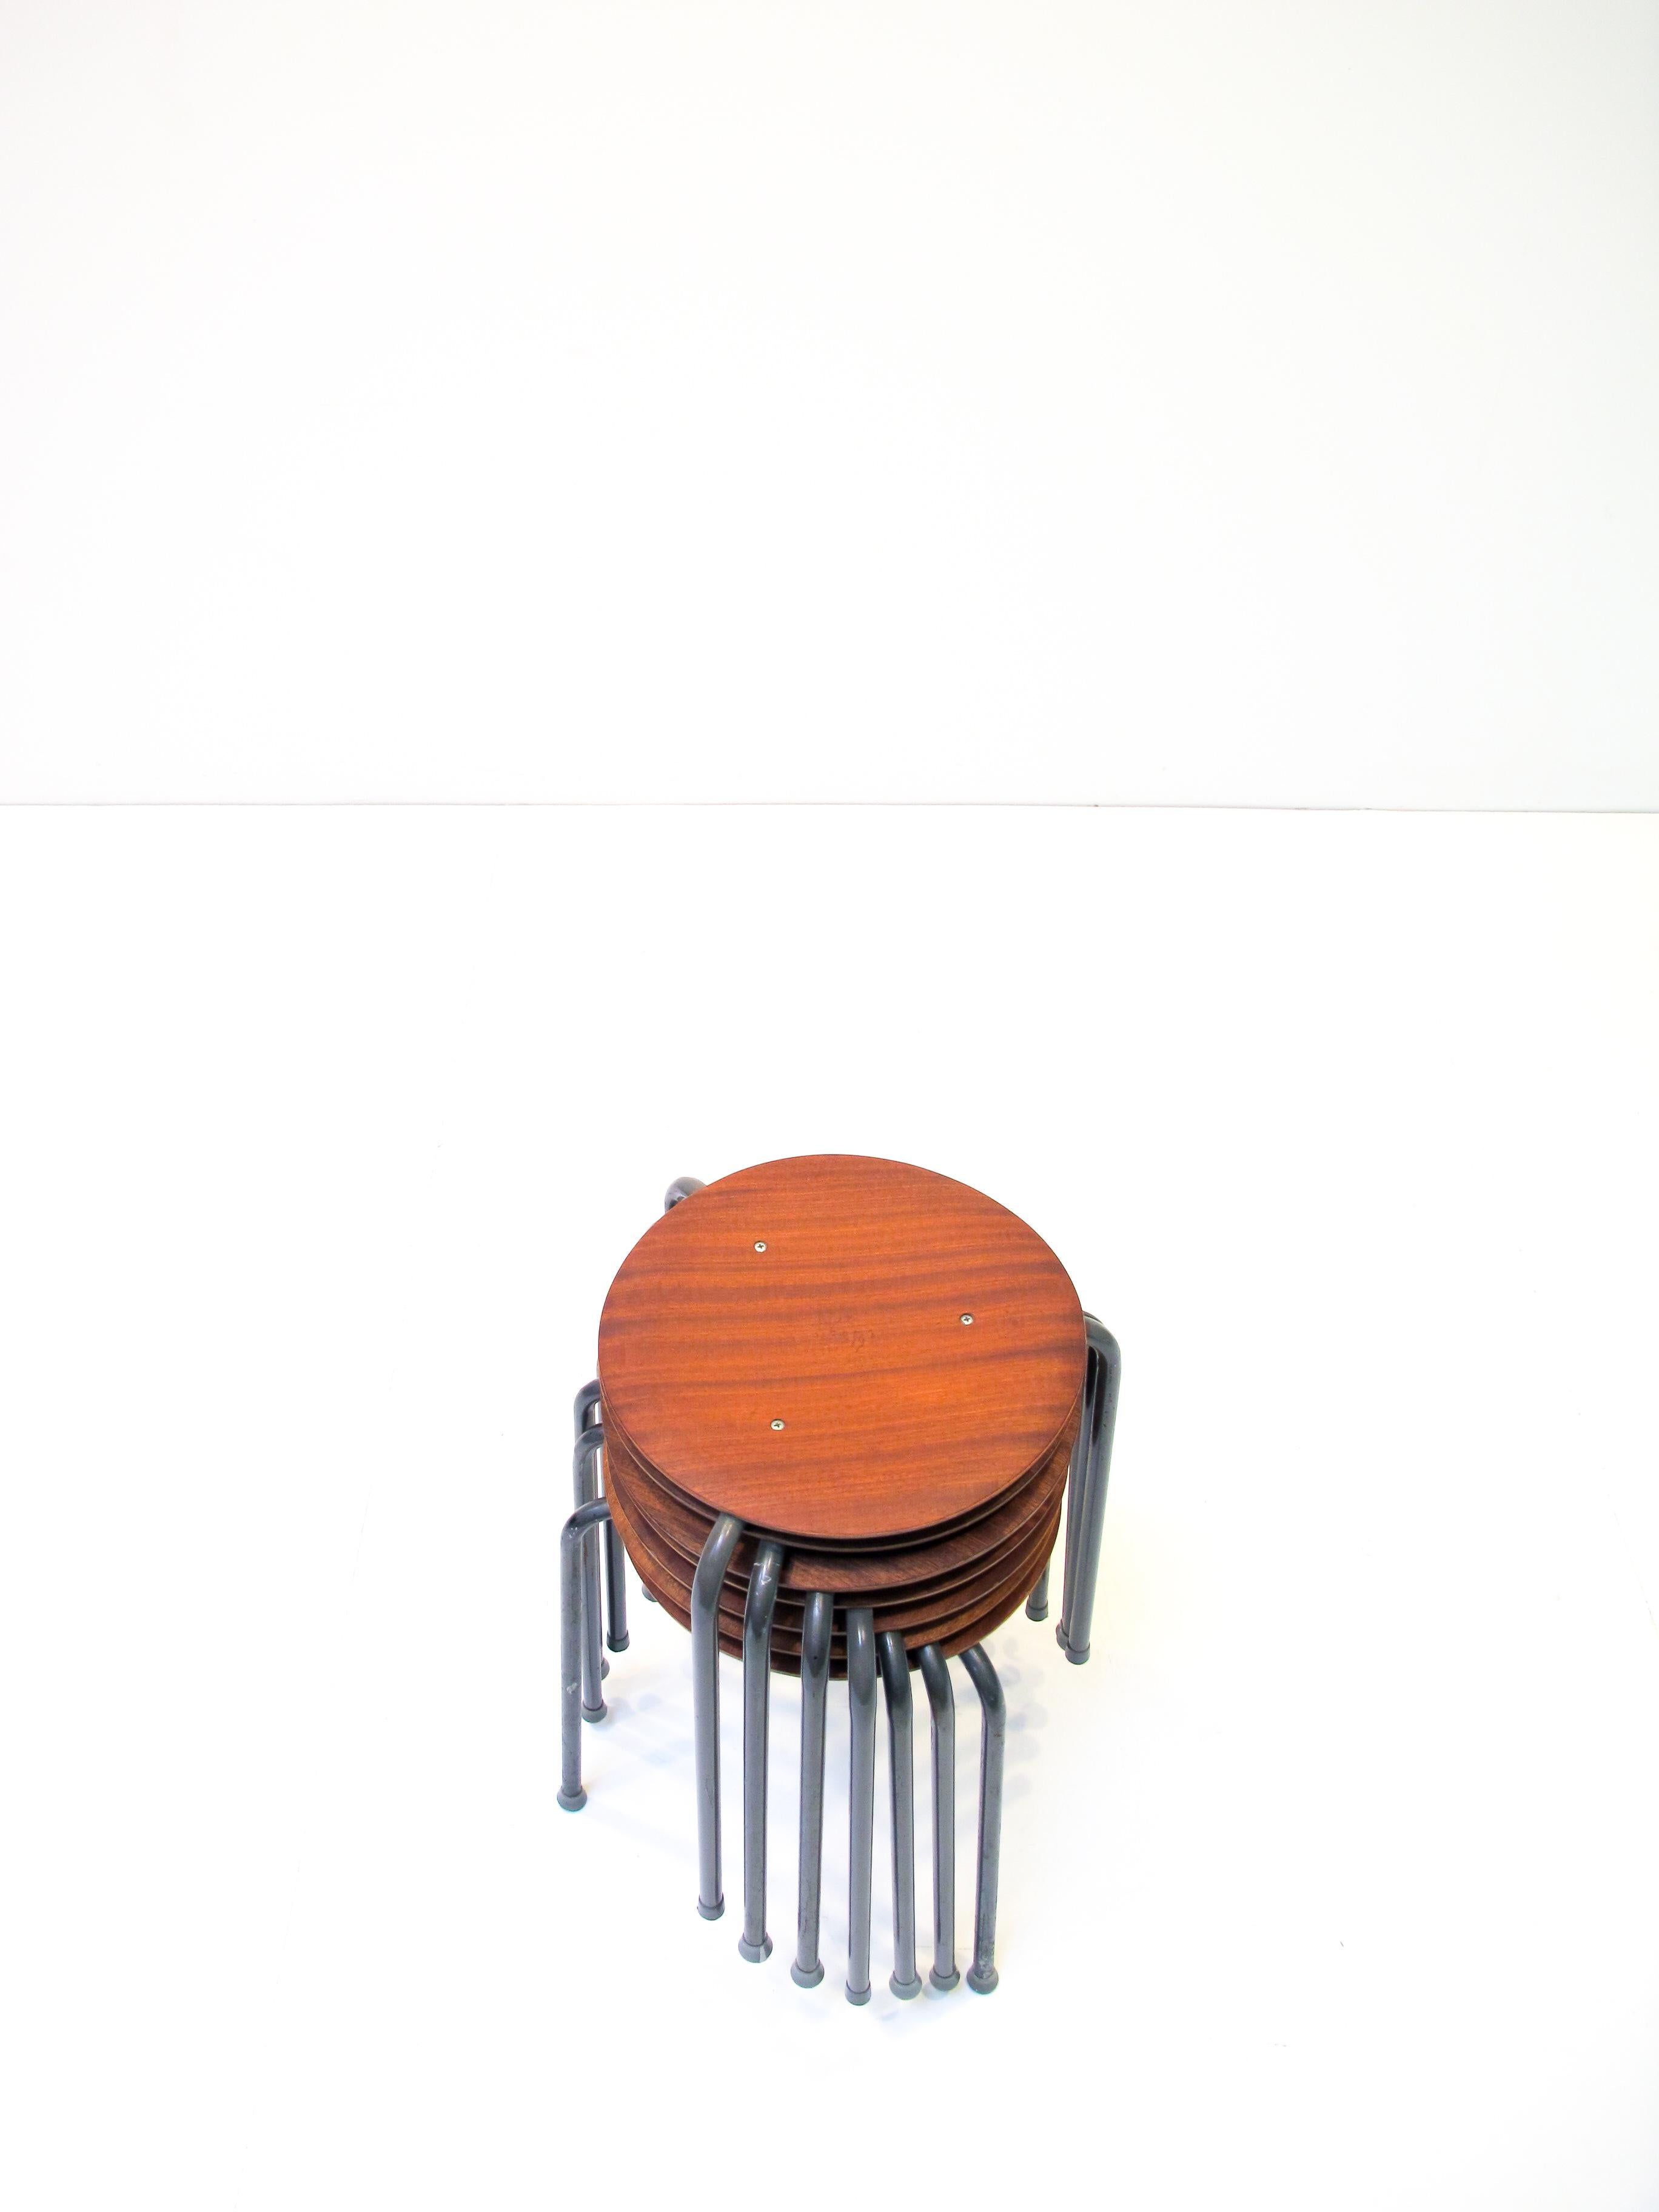 Scandinavian Modern Three-Legged Stacking Stool with Molded Plywood Seatings, 1950s Denmark  For Sale